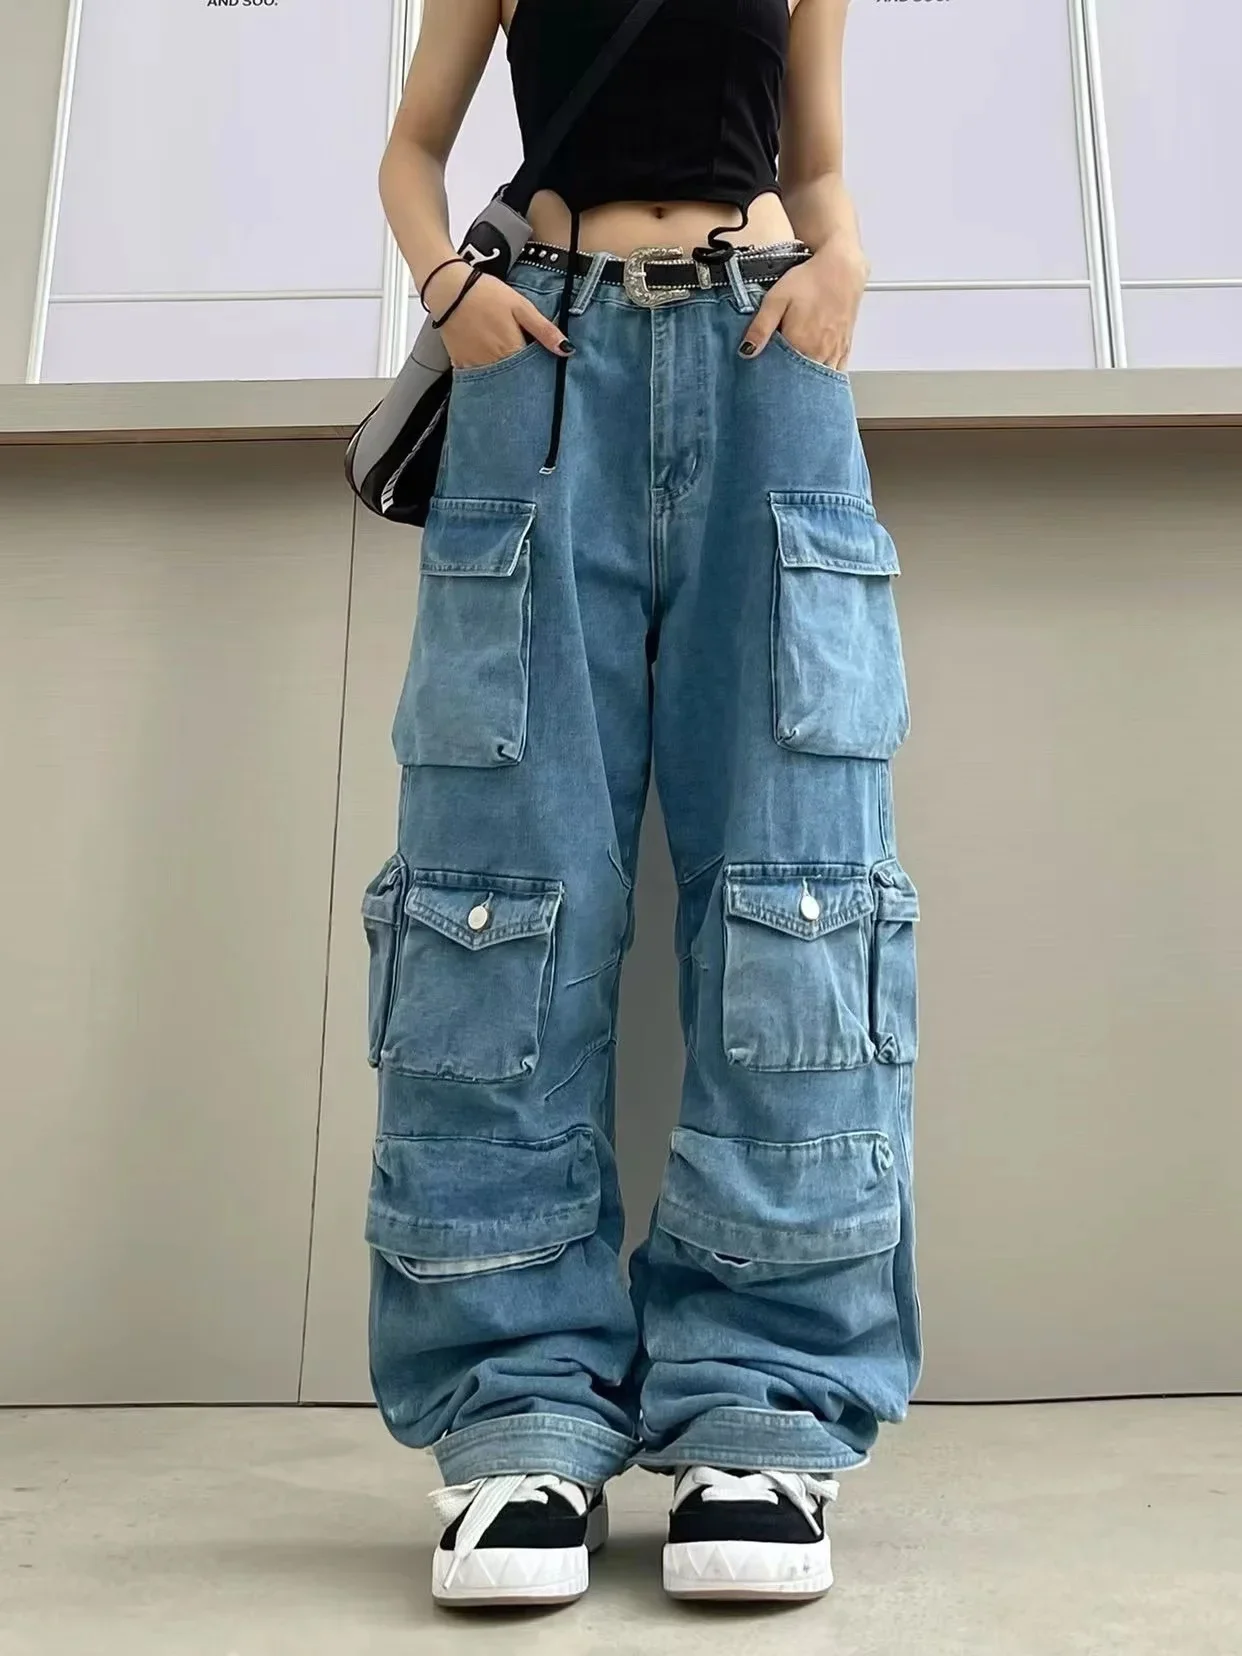 

Multi-Pocket Blue Washed Cargo Pants Y2k Retro High Street Fashion High Waist Jeans Couple Casual Joker Mopping Jeans Pant Women